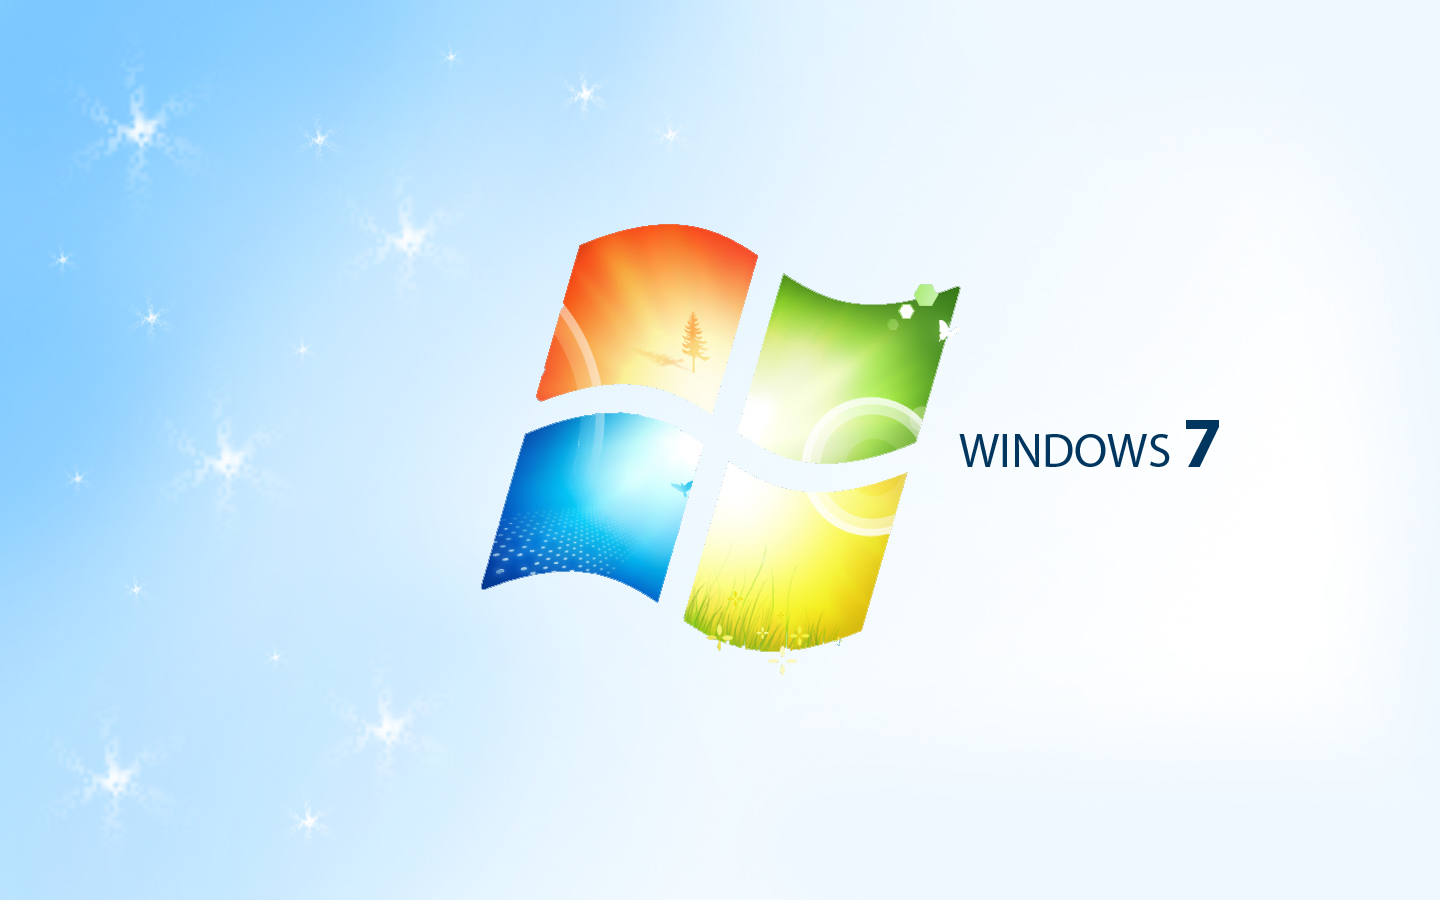 Windows 7 Rules PC Market in the UK